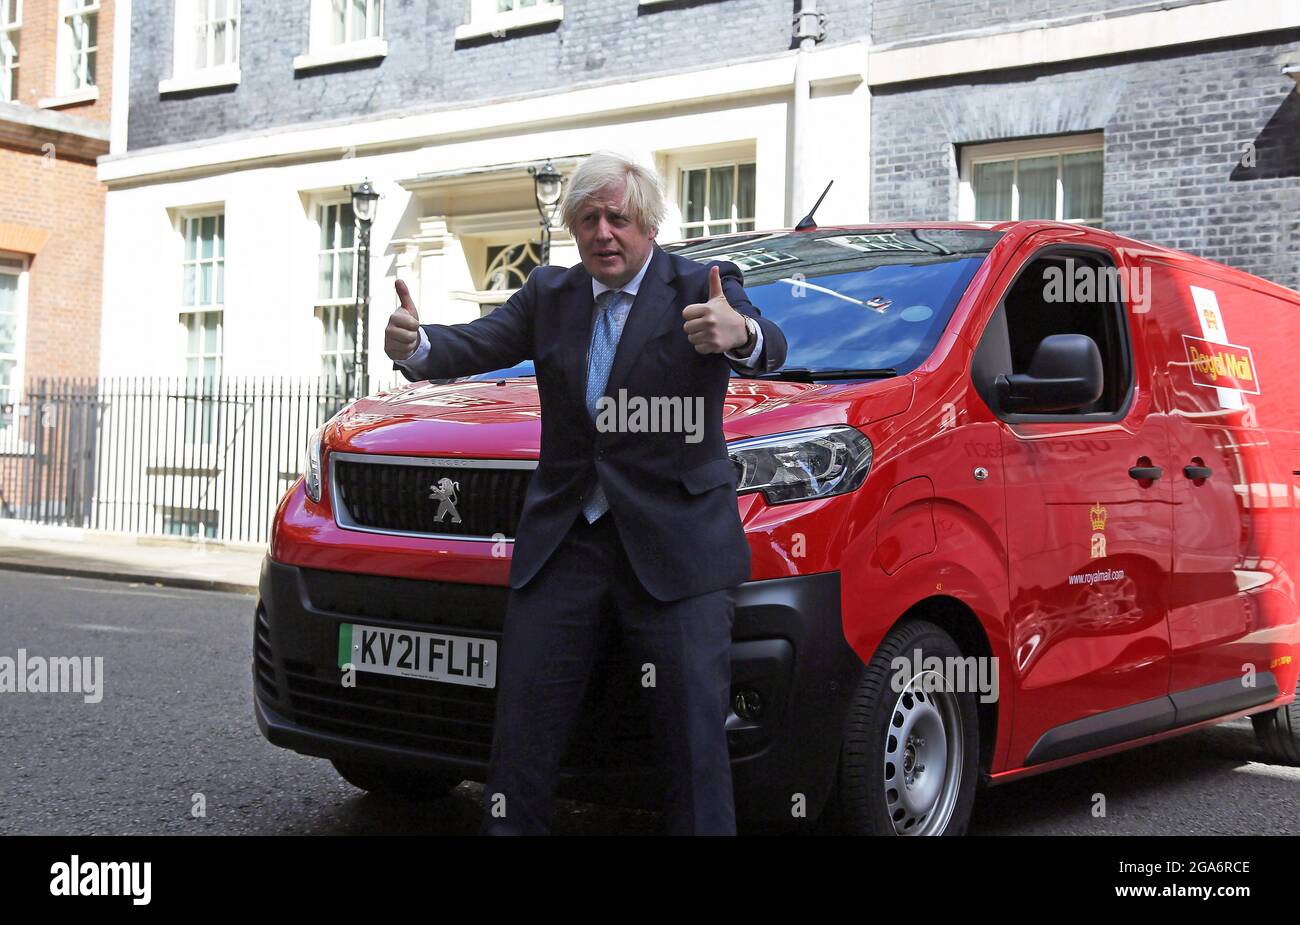 London, England, UK. 29th July, 2021. UK Prime Minister BORIS JOHNSON is seen at Downing Street during a photocall for electric cars. (Credit Image: © Tayfun Salci/ZUMA Press Wire) Stock Photo